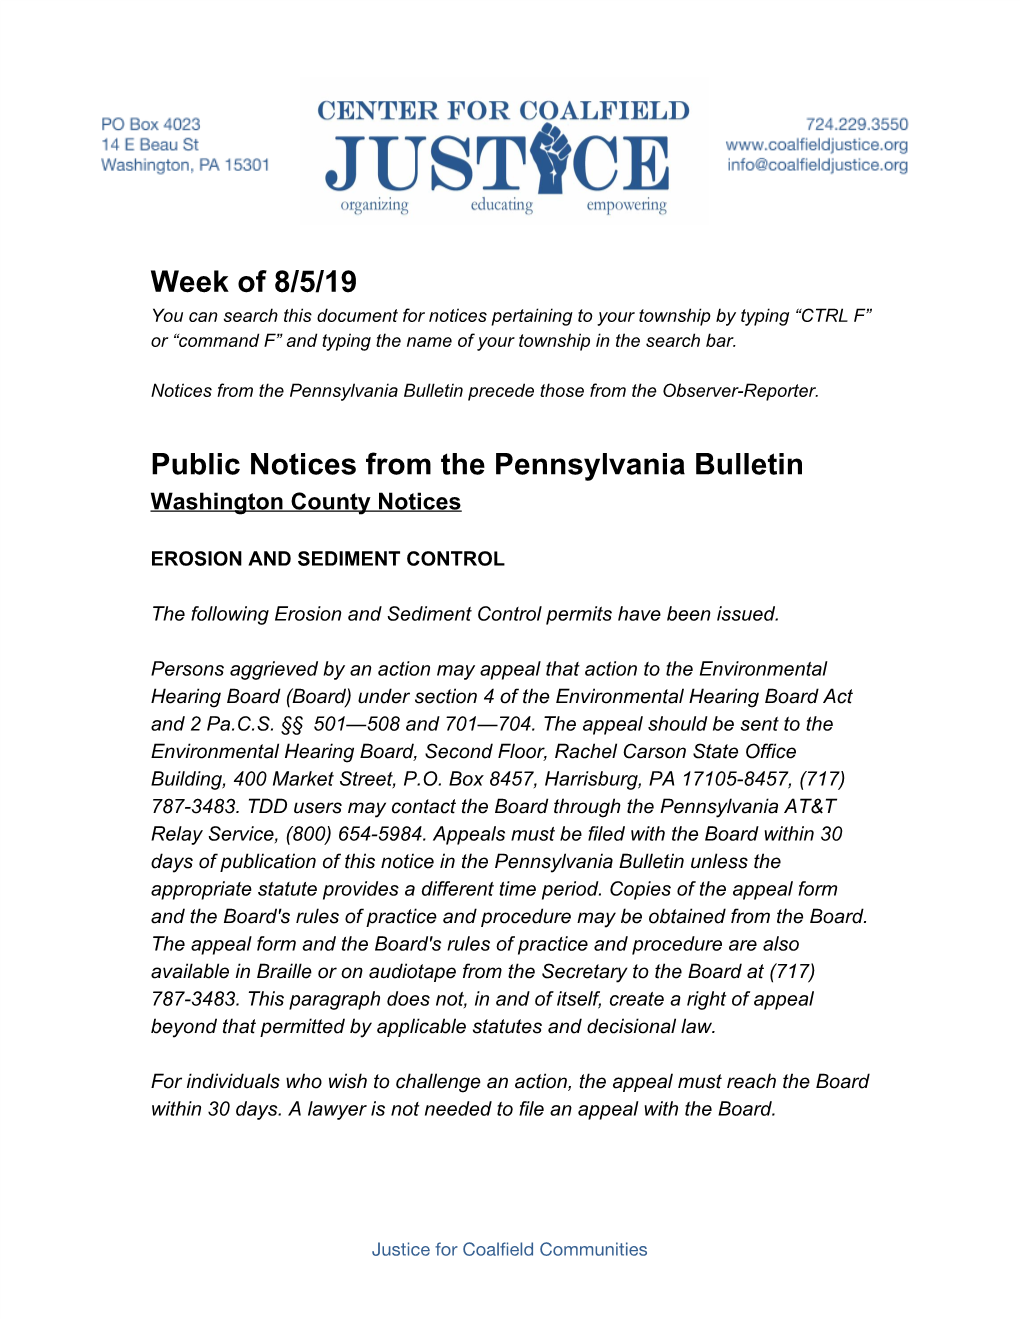 Week of 8/5/19 Public Notices from the Pennsylvania Bulletin